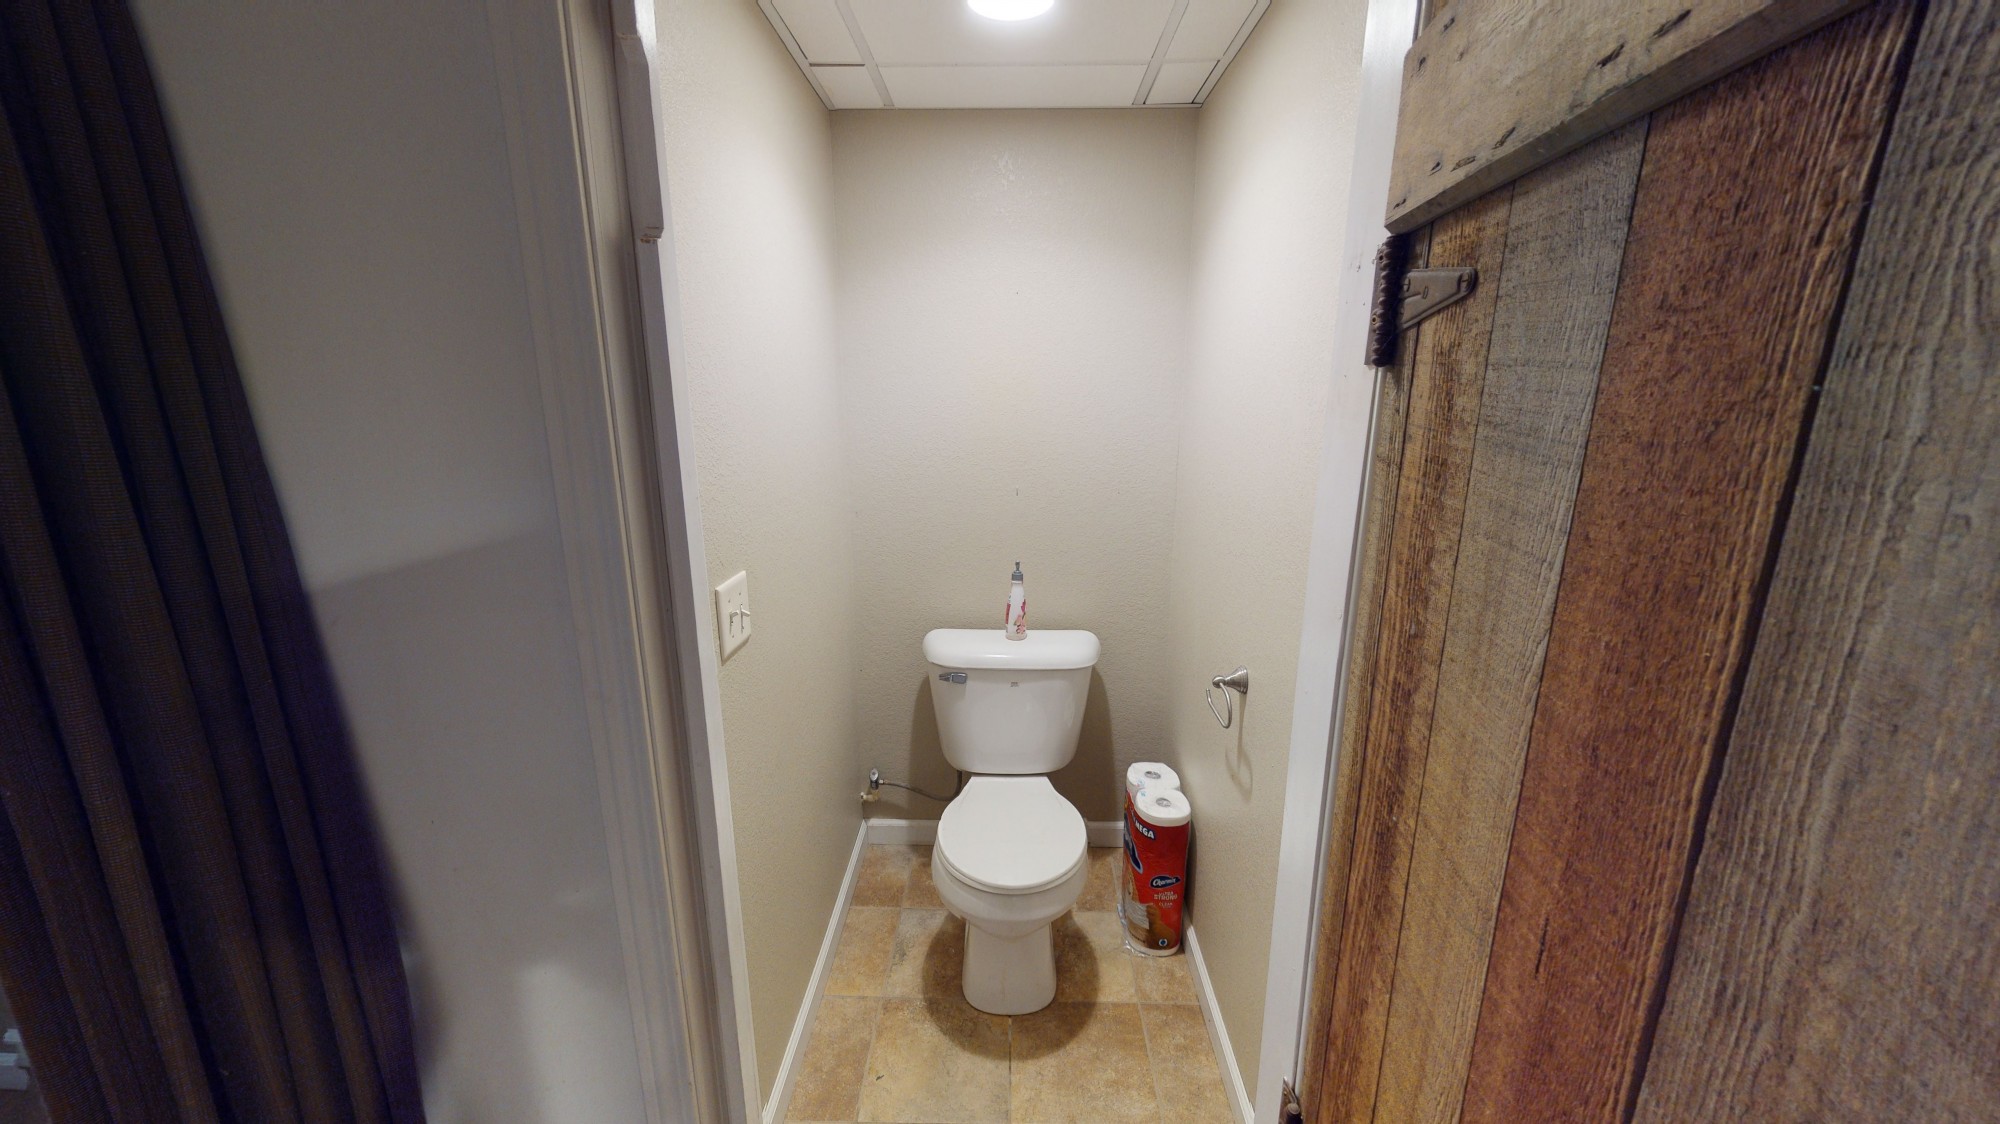 Full Bathroom
Partially Finished Basement 